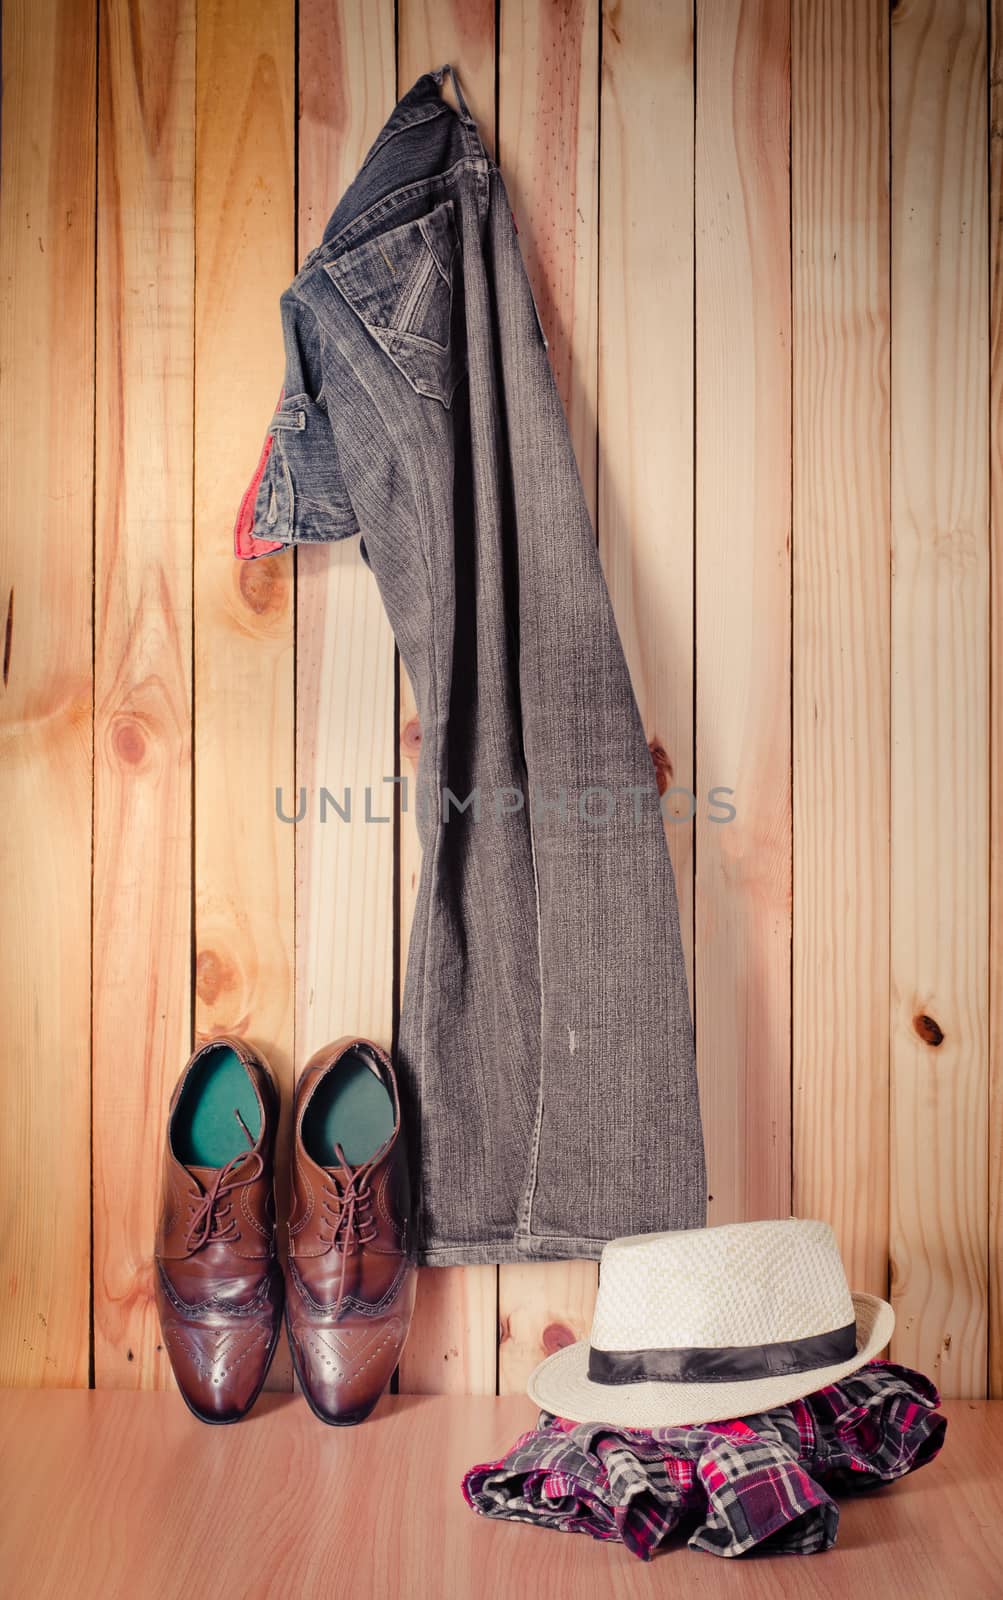 costume hanging on wooden wall background - still life tone vintage by photobyphotoboy